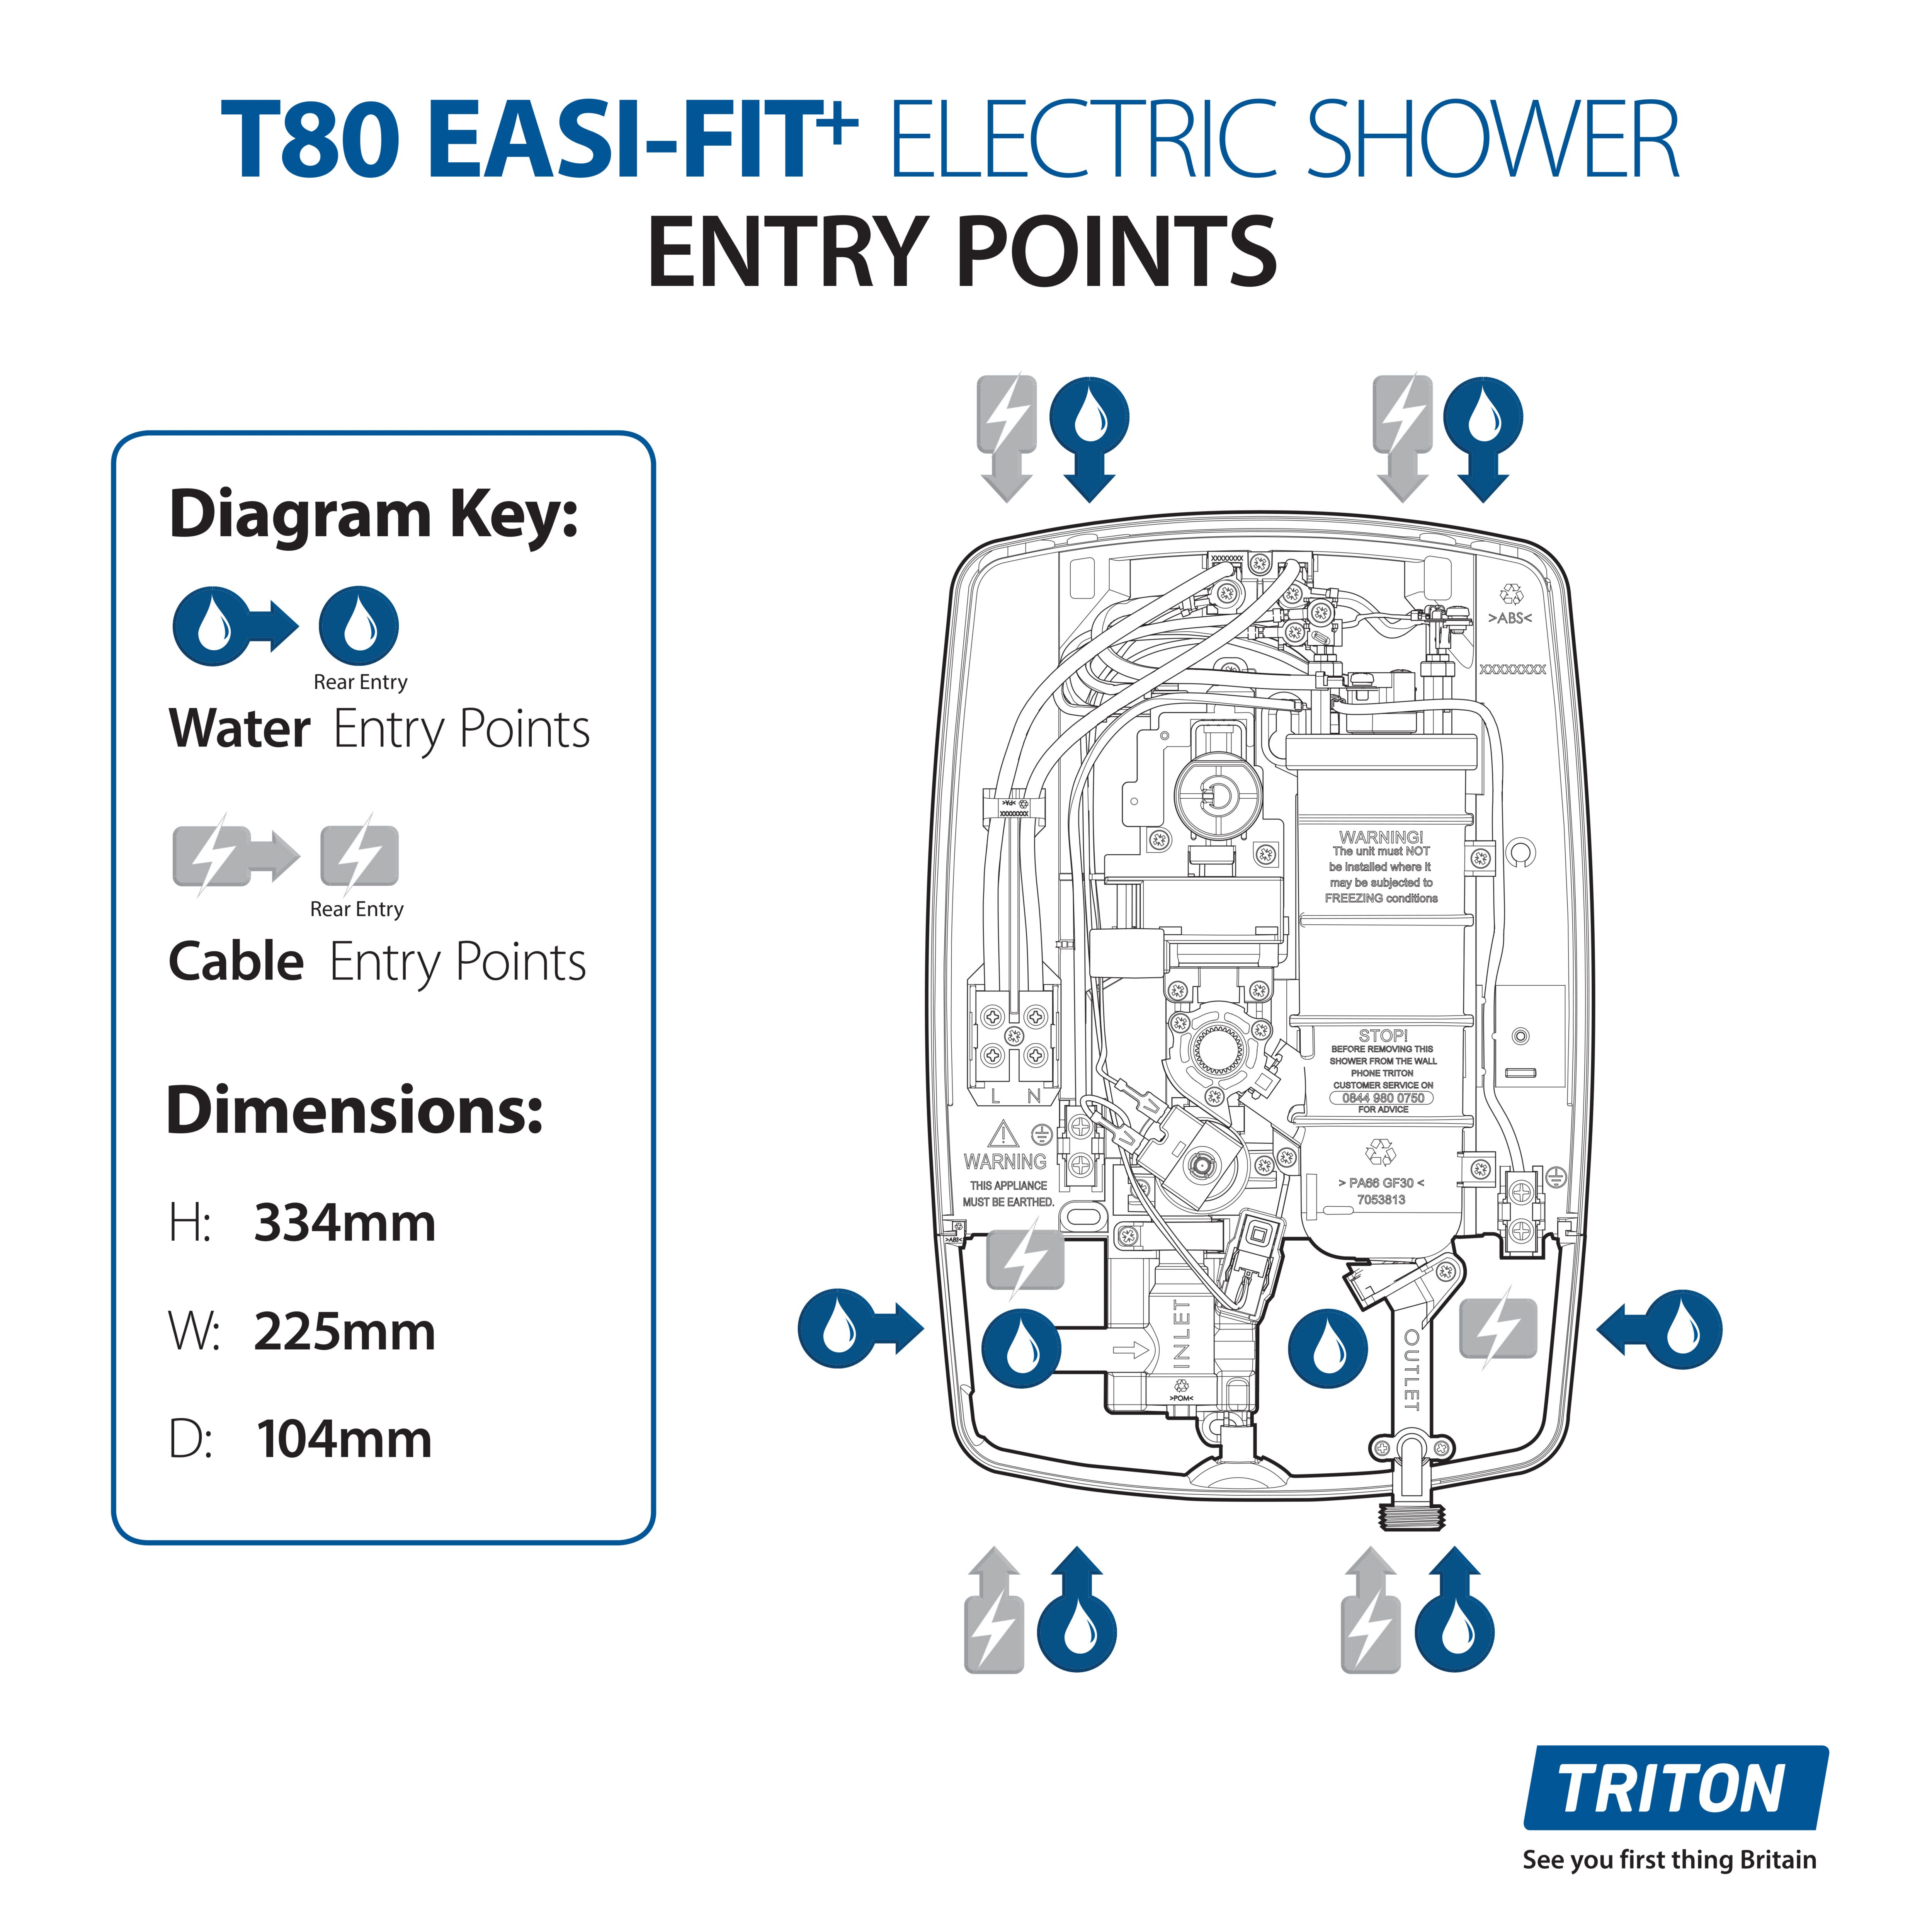 Triton T80 Easi-fit+ Gloss White Manual Electric Shower, 7.5kW